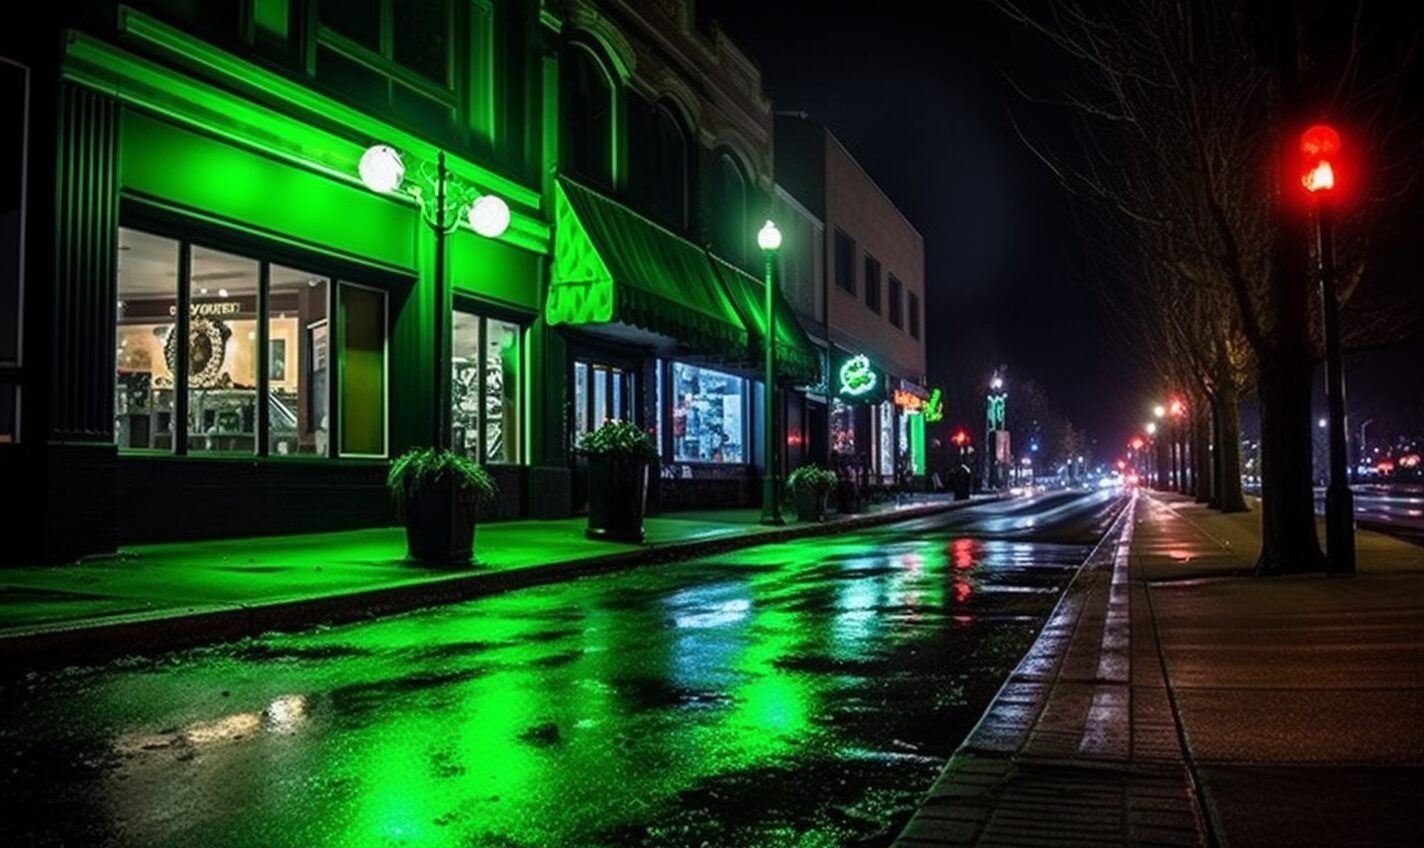 vancouver, washington in a black and neon green glow